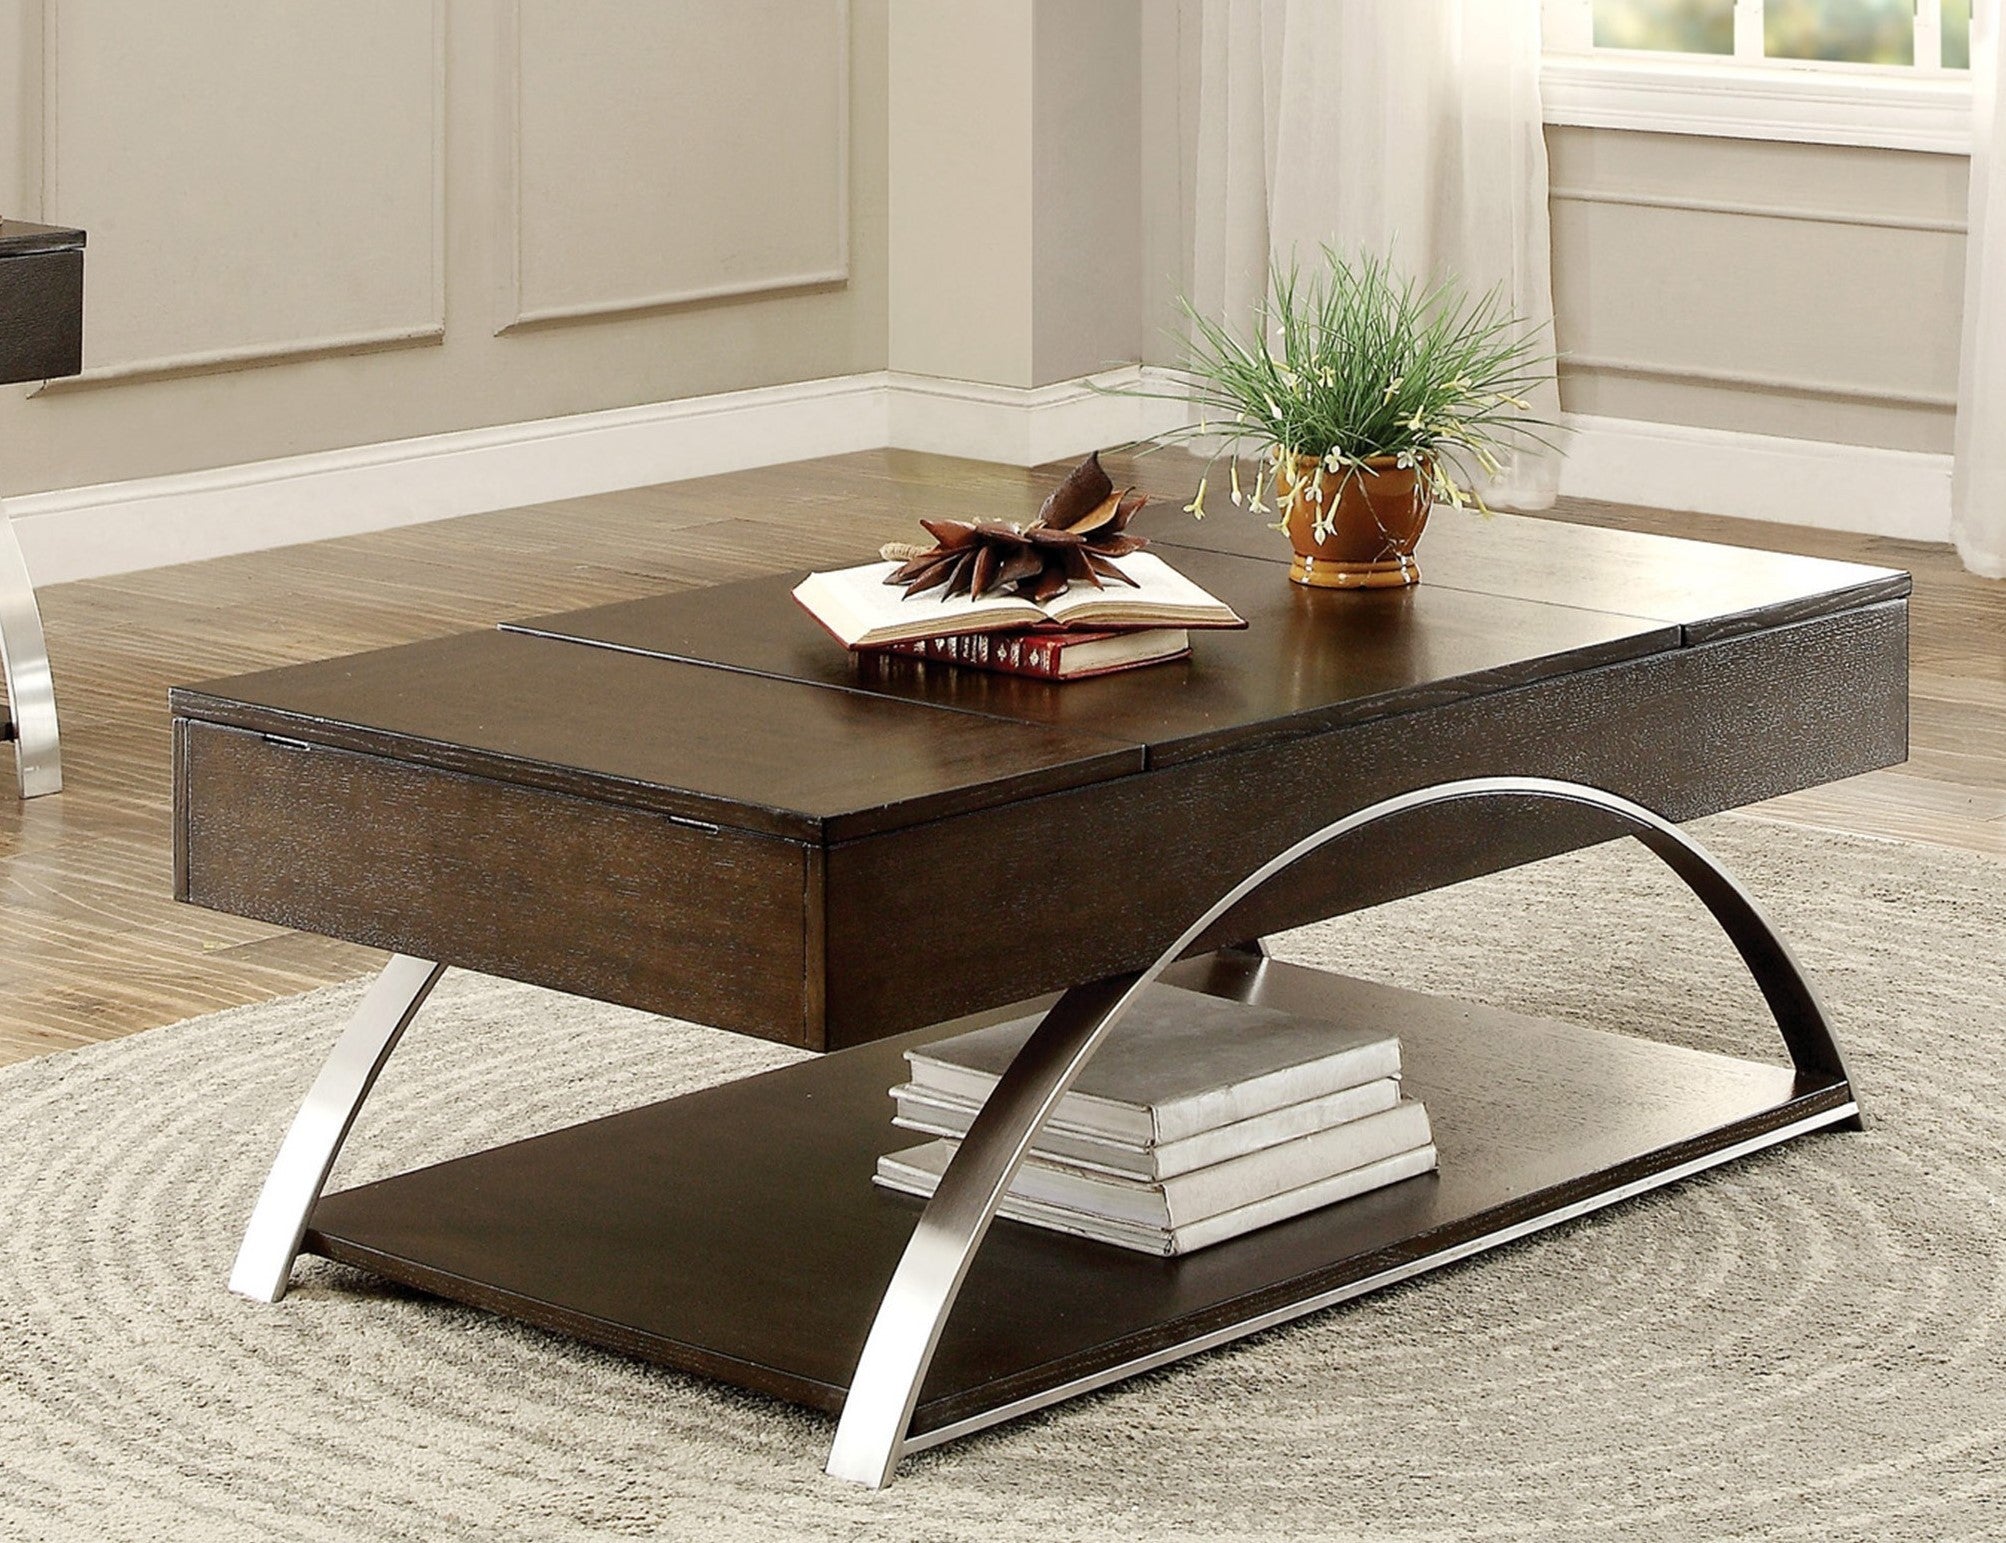 Modern Living Room Furniture Lift Top Coffee Table with Display Shelf